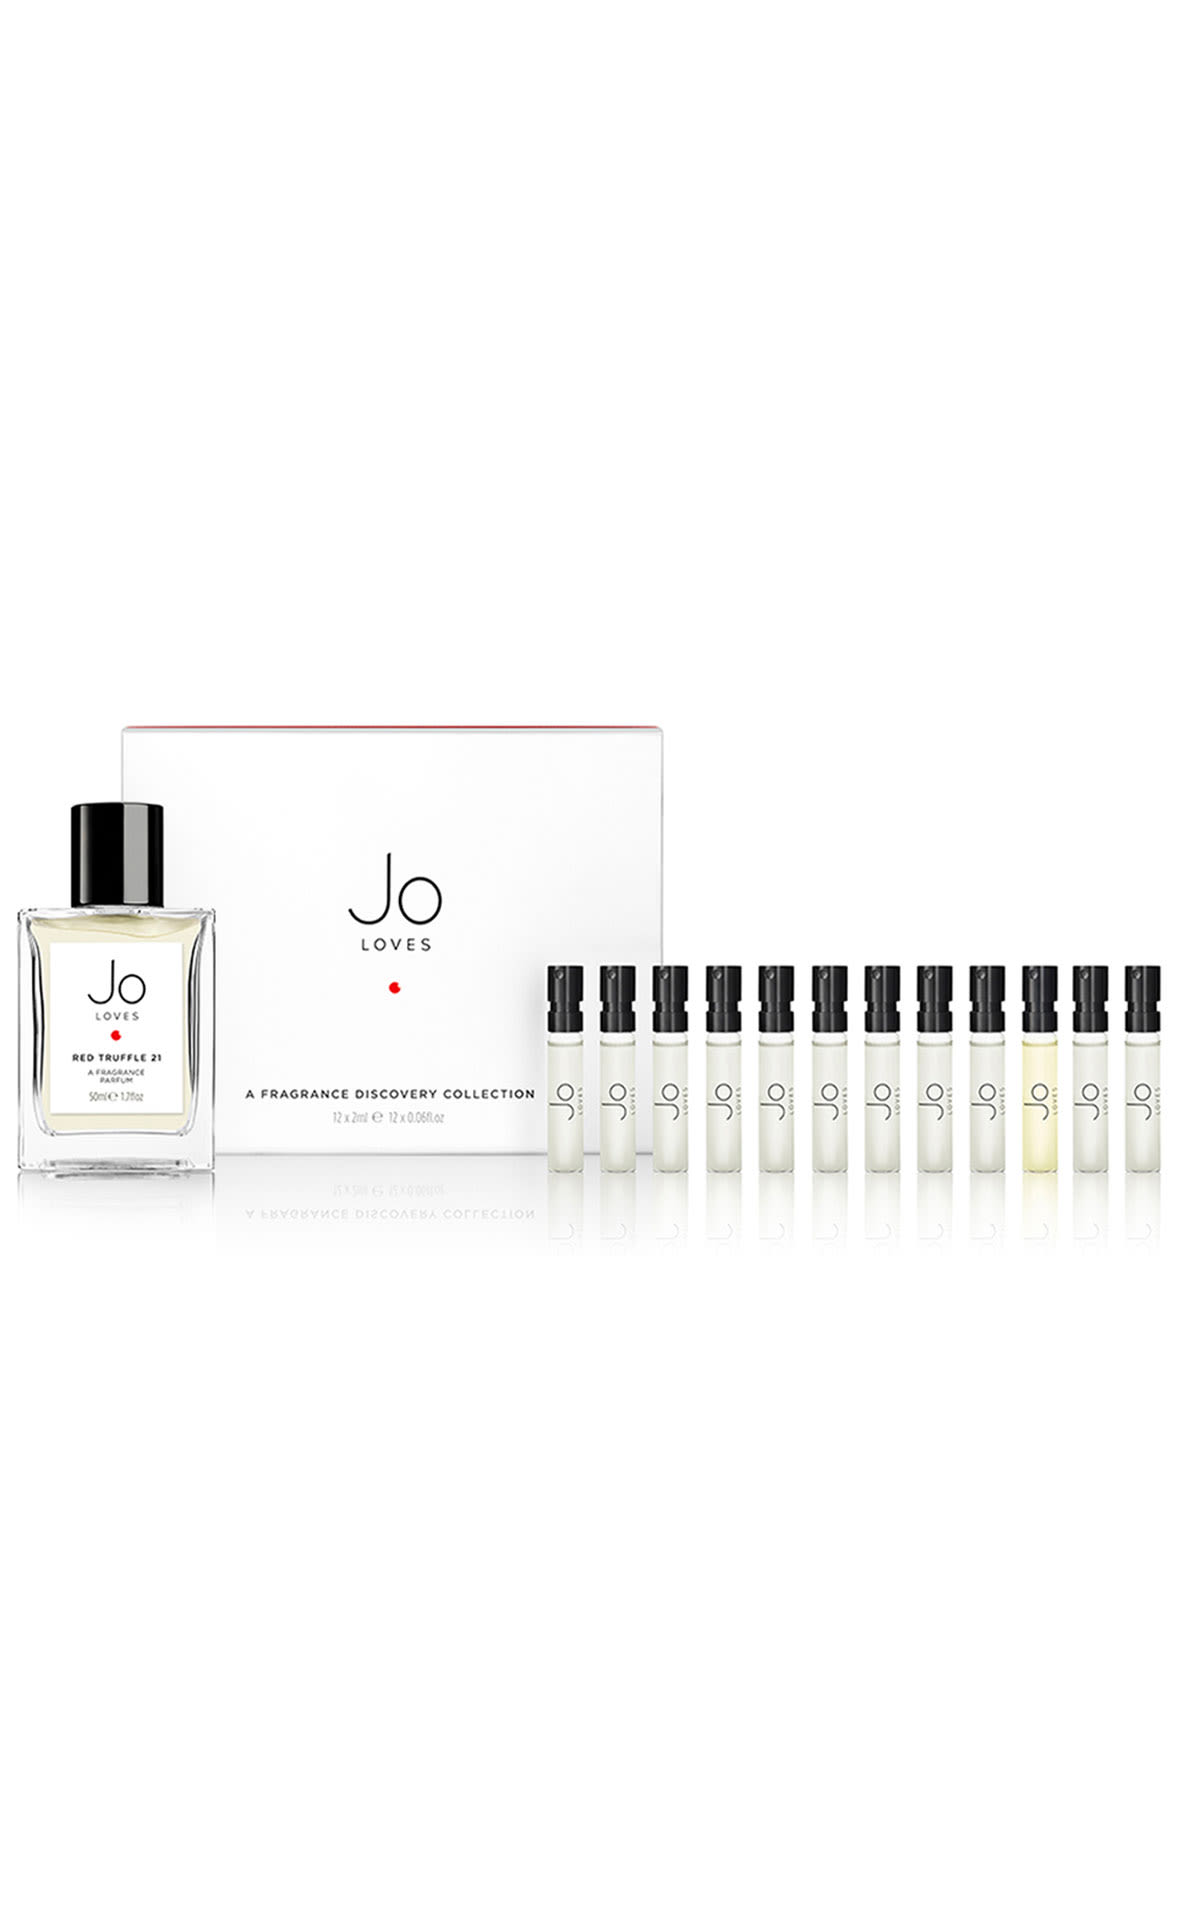 Jo Loves A fragrance discovery collection from Bicester Village